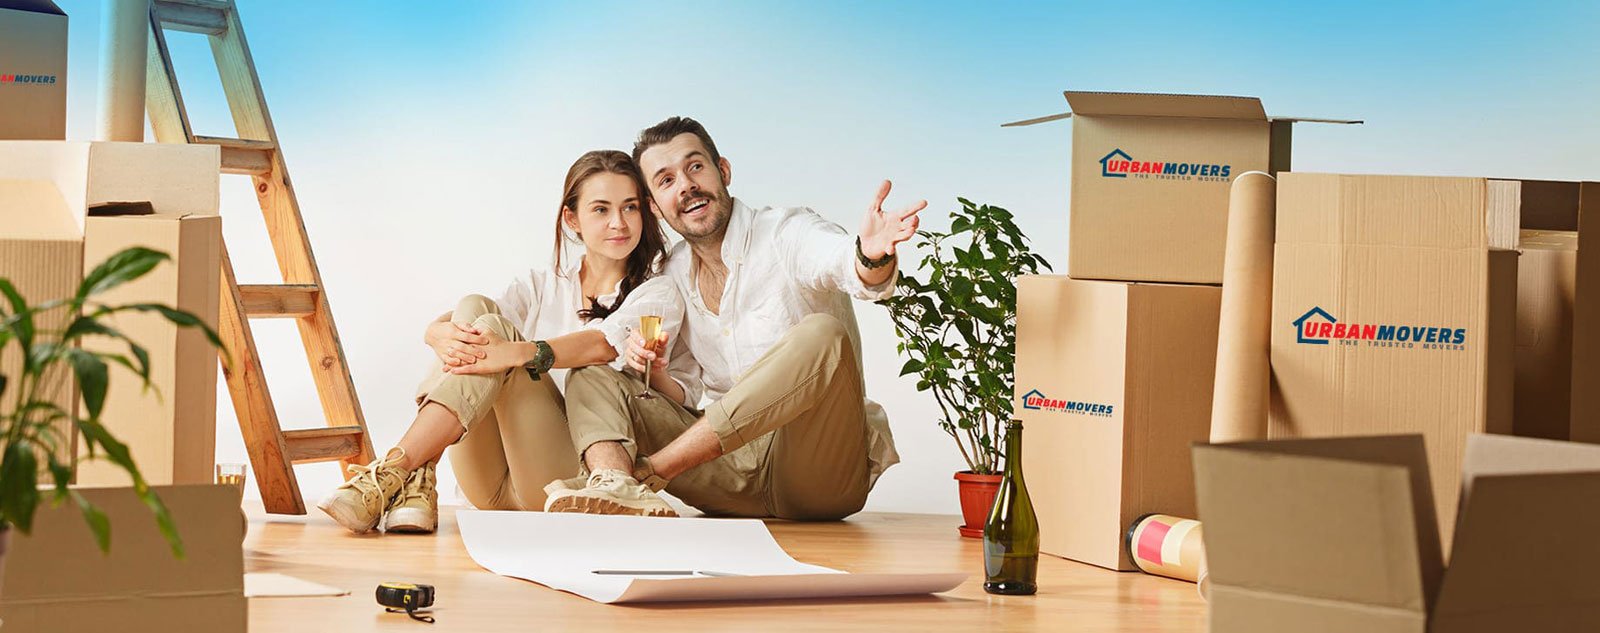 Packers and Movers Melbourne